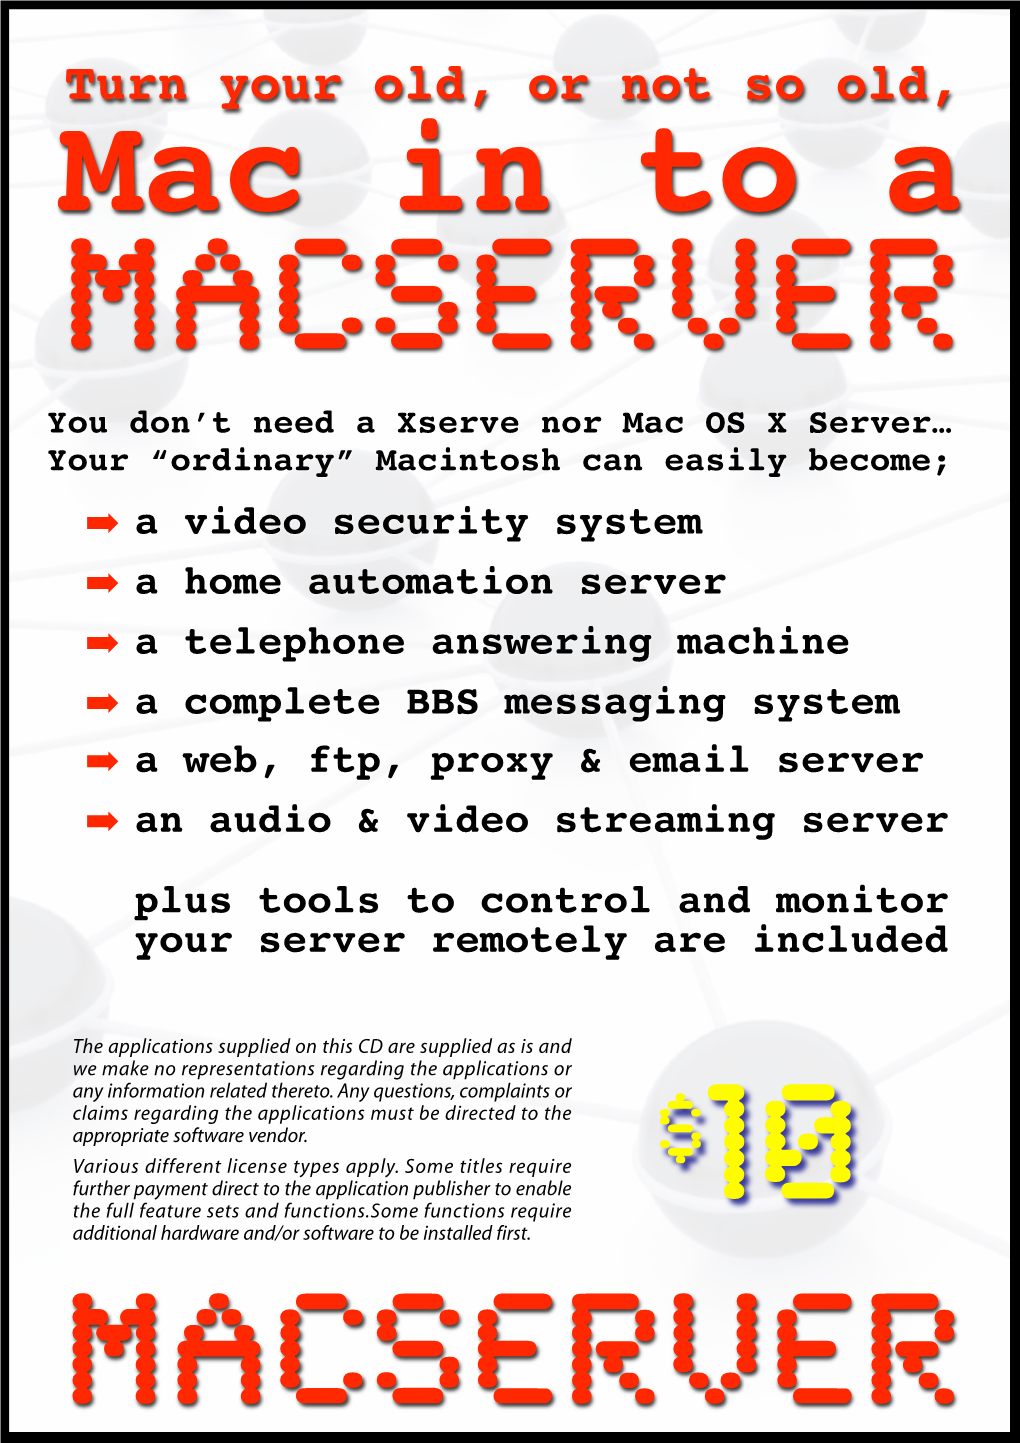 About Macserver